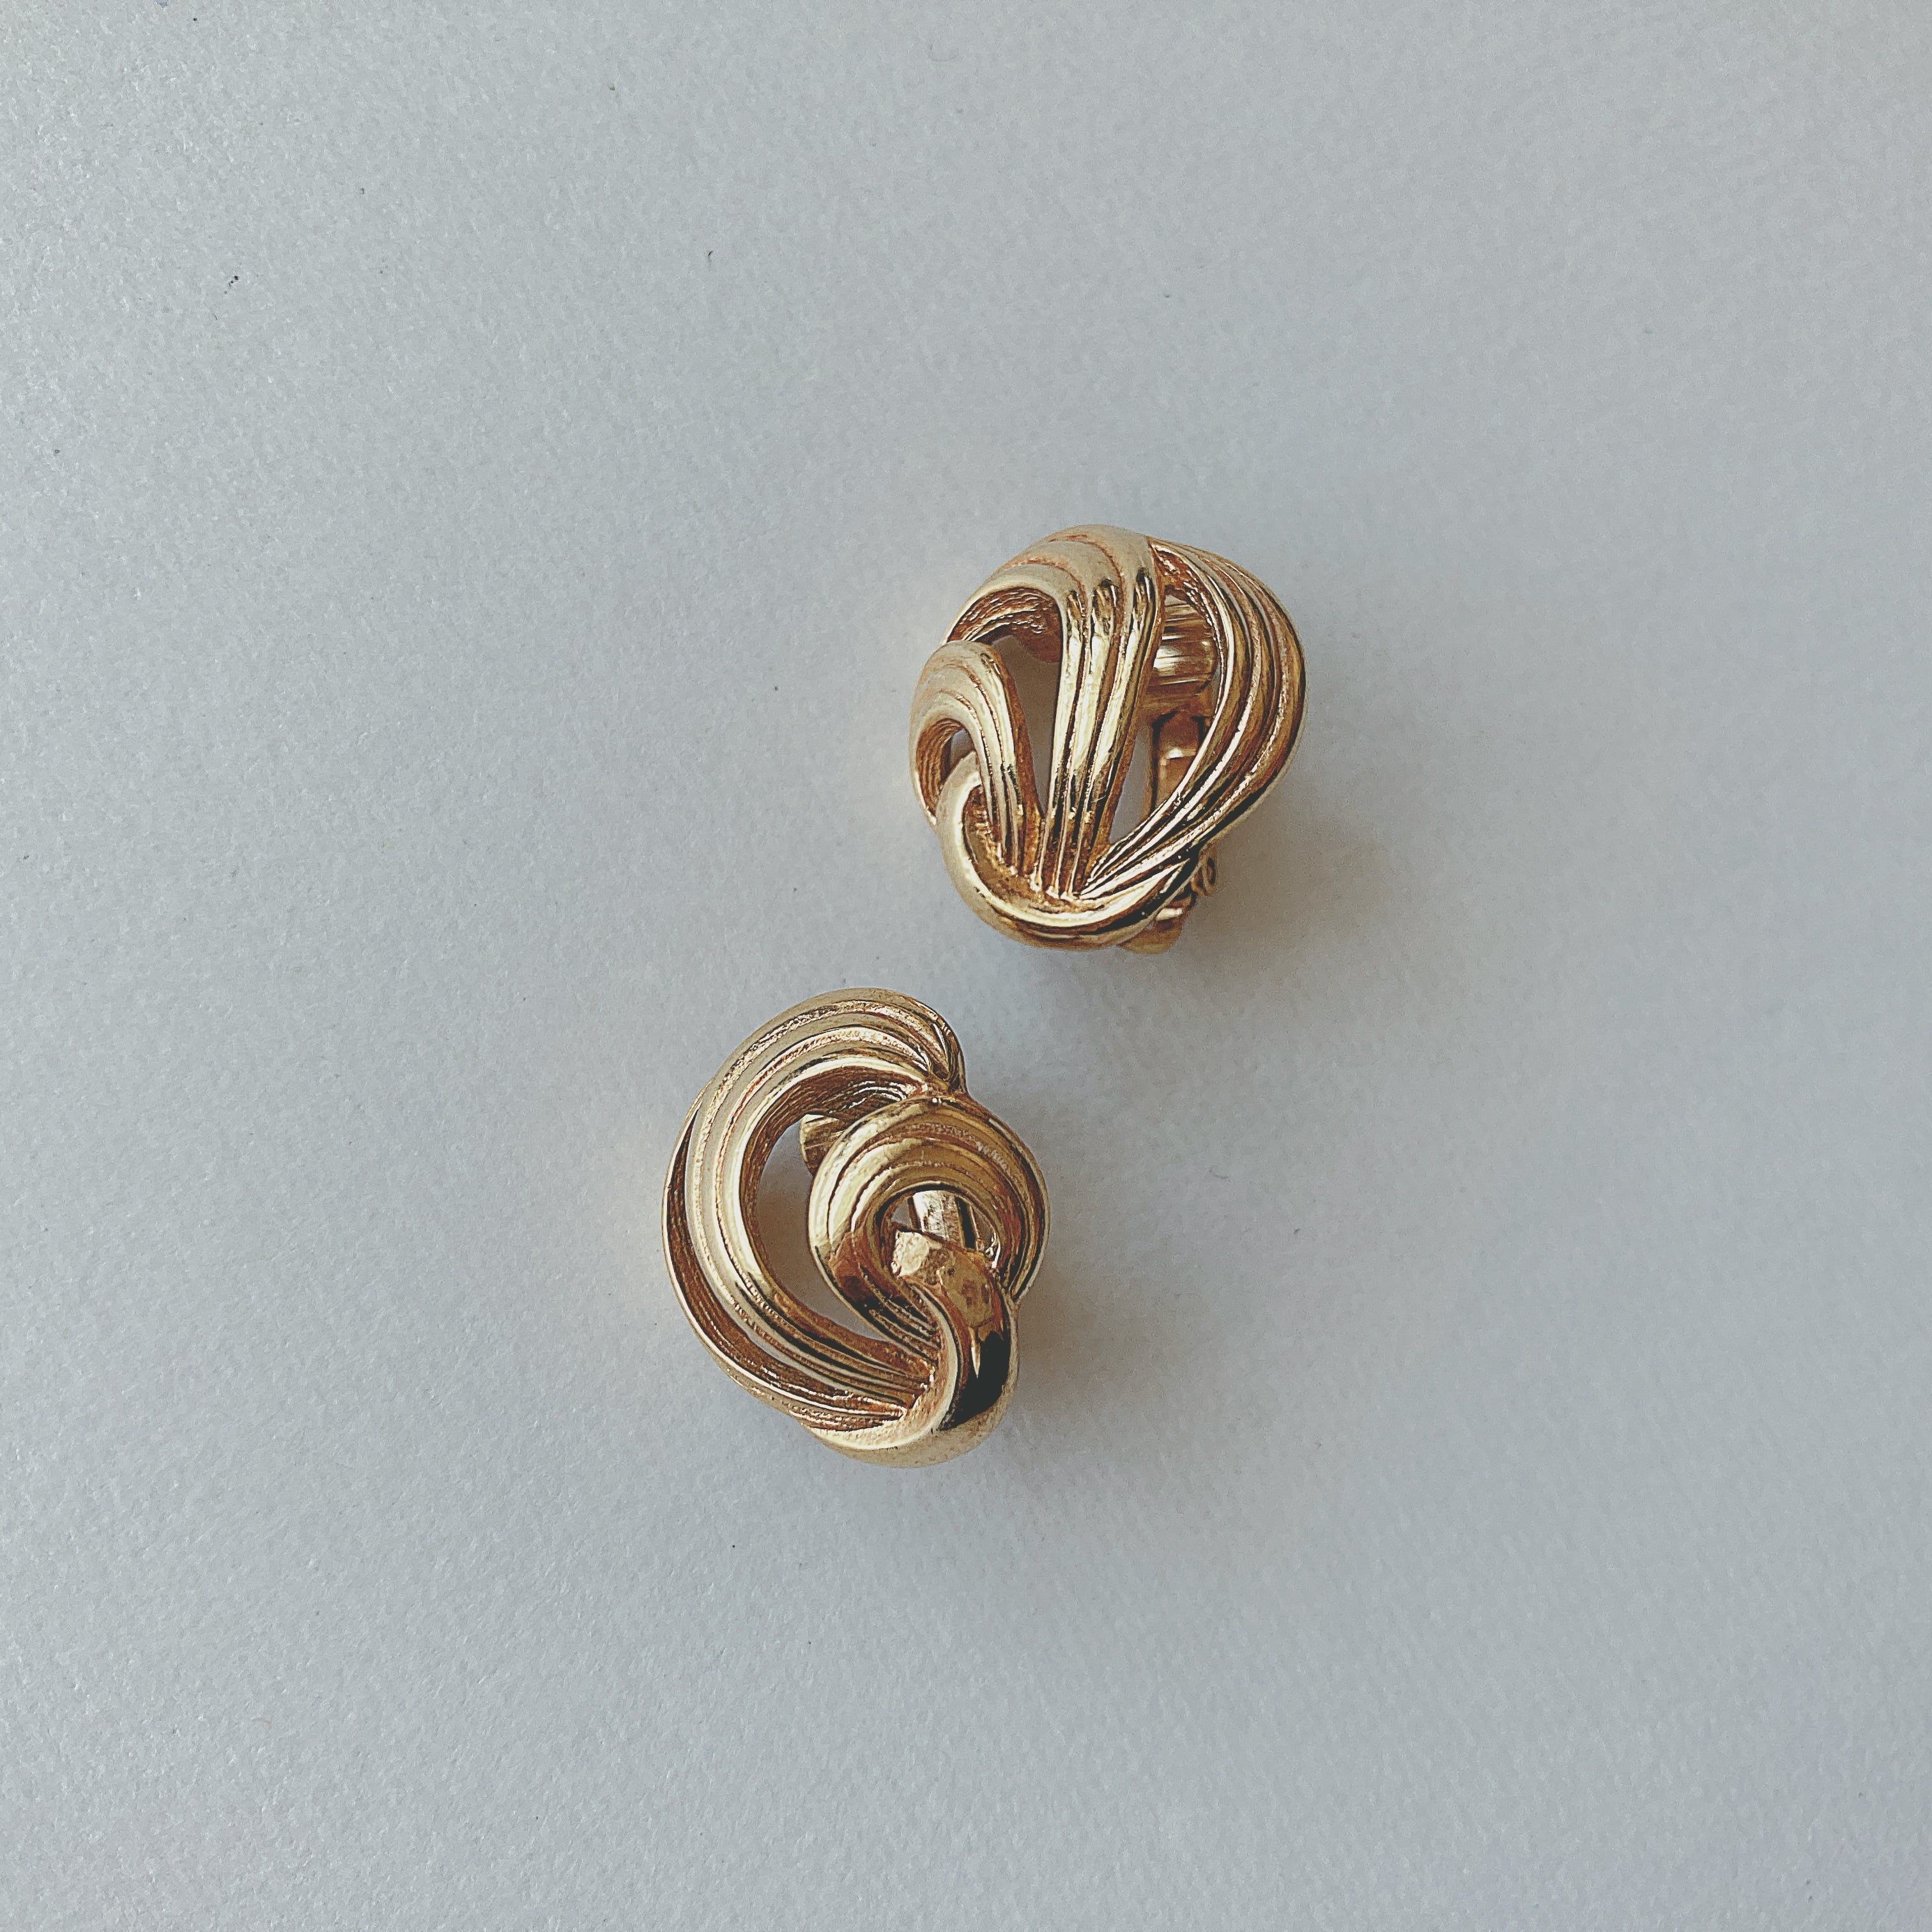 Christian Dior Vintage 70s GERMANY gold tone earrings